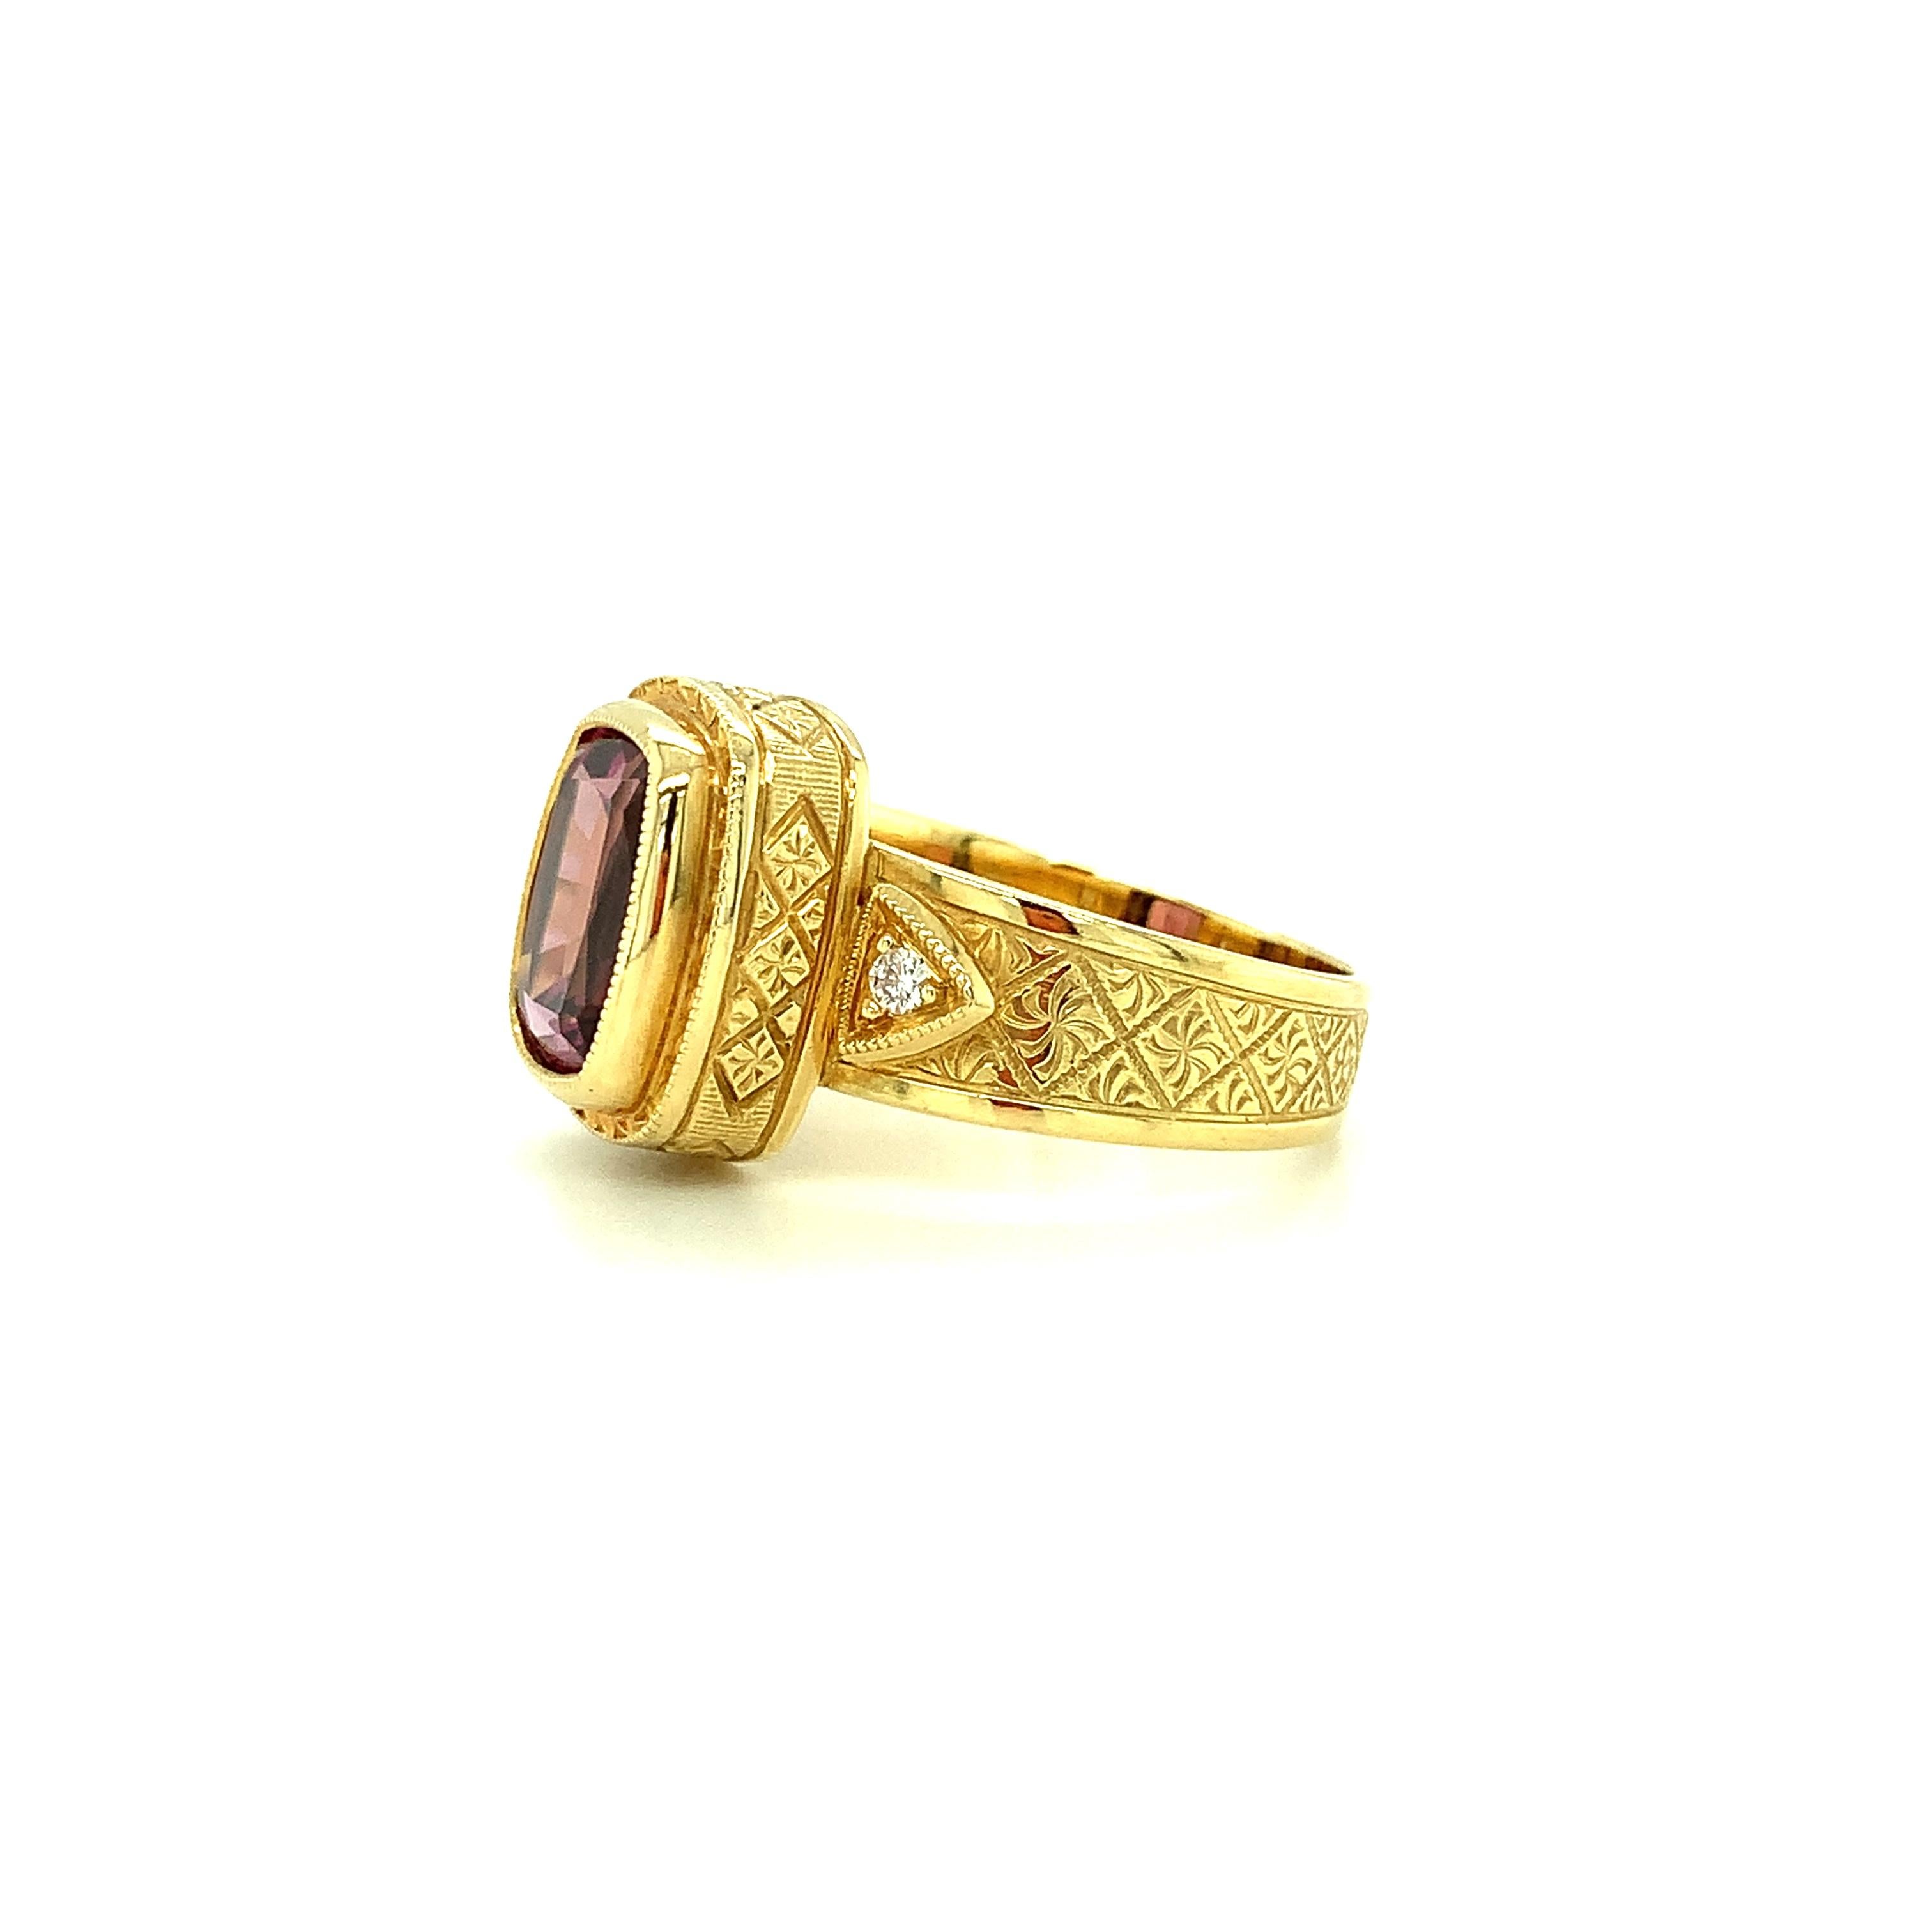 4.30 Carat Rhodolite Garnet and Diamond Band Ring in 18k Yellow Gold   In New Condition For Sale In Los Angeles, CA